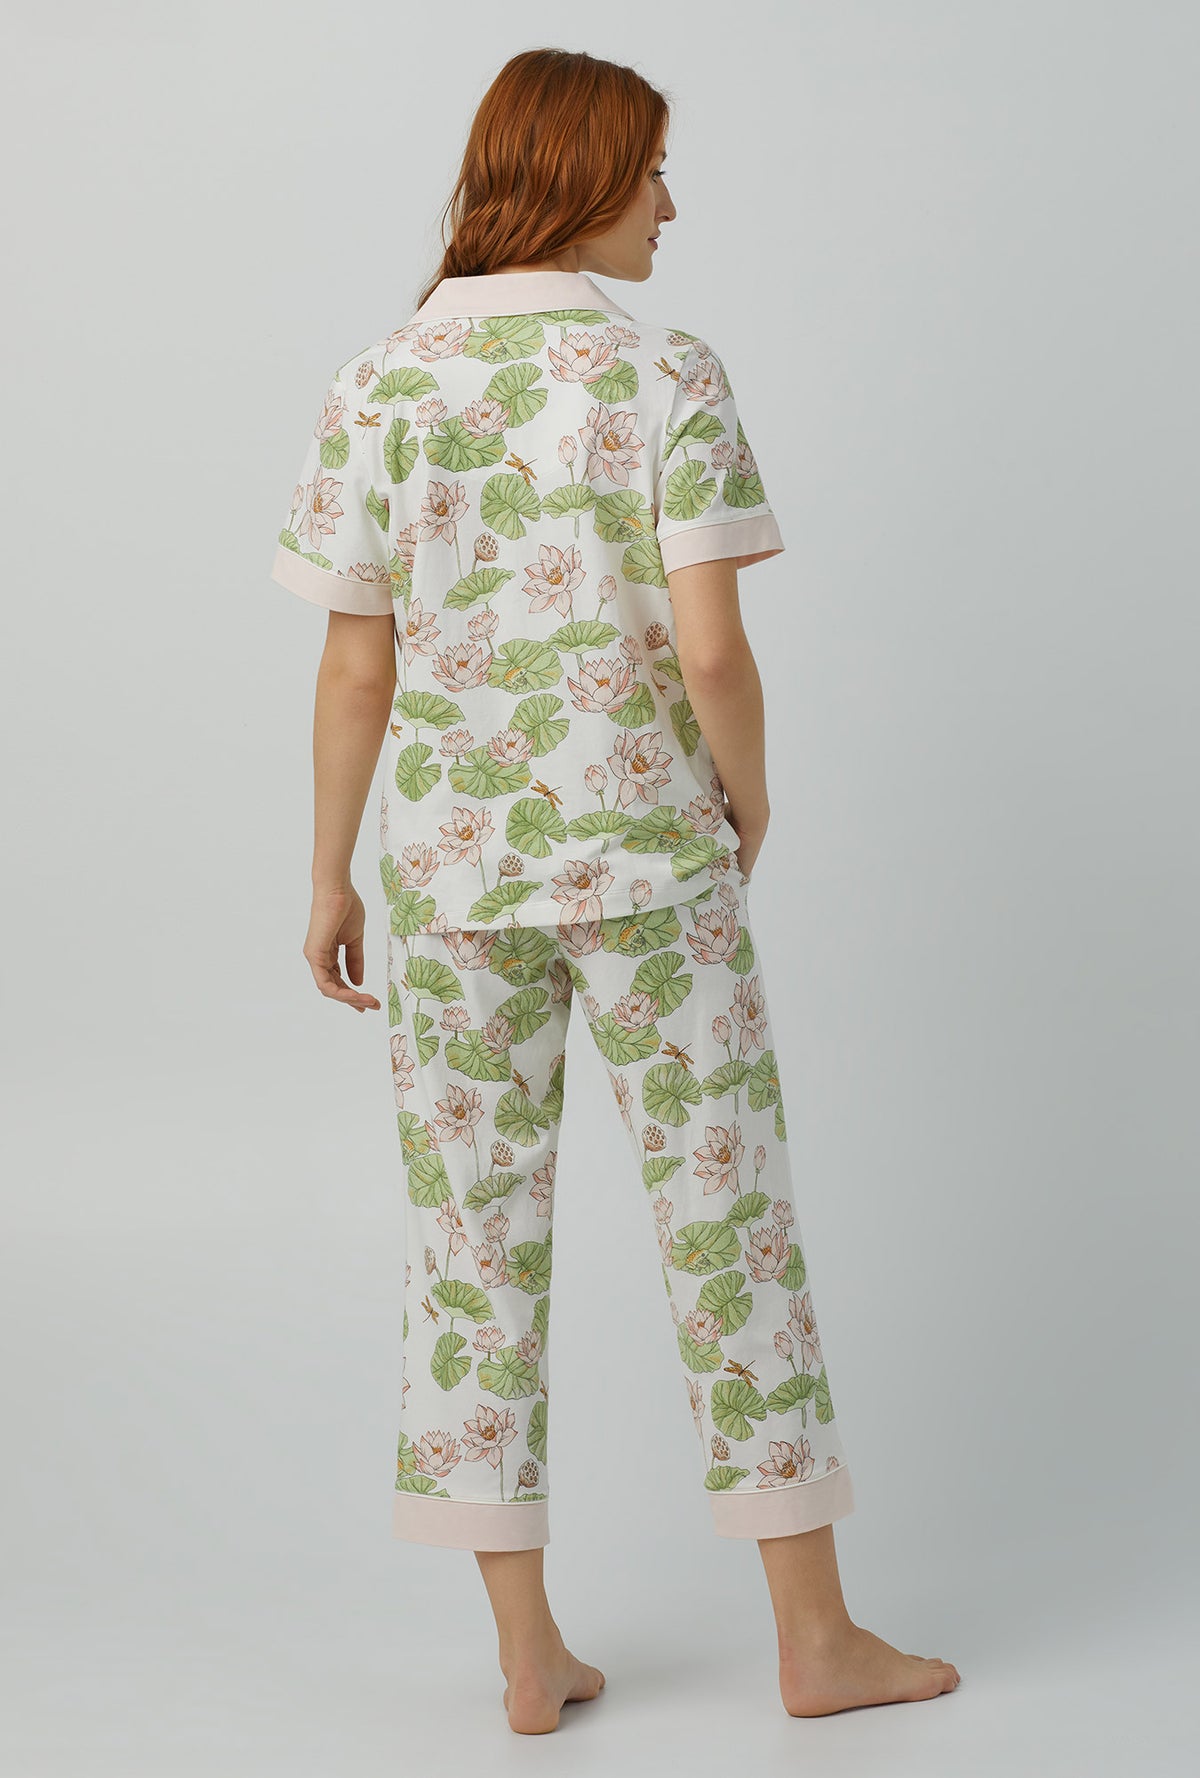 A lady wearing Short Sleeve Classic Stretch Jersey Cropped PJ Set with lily pond print